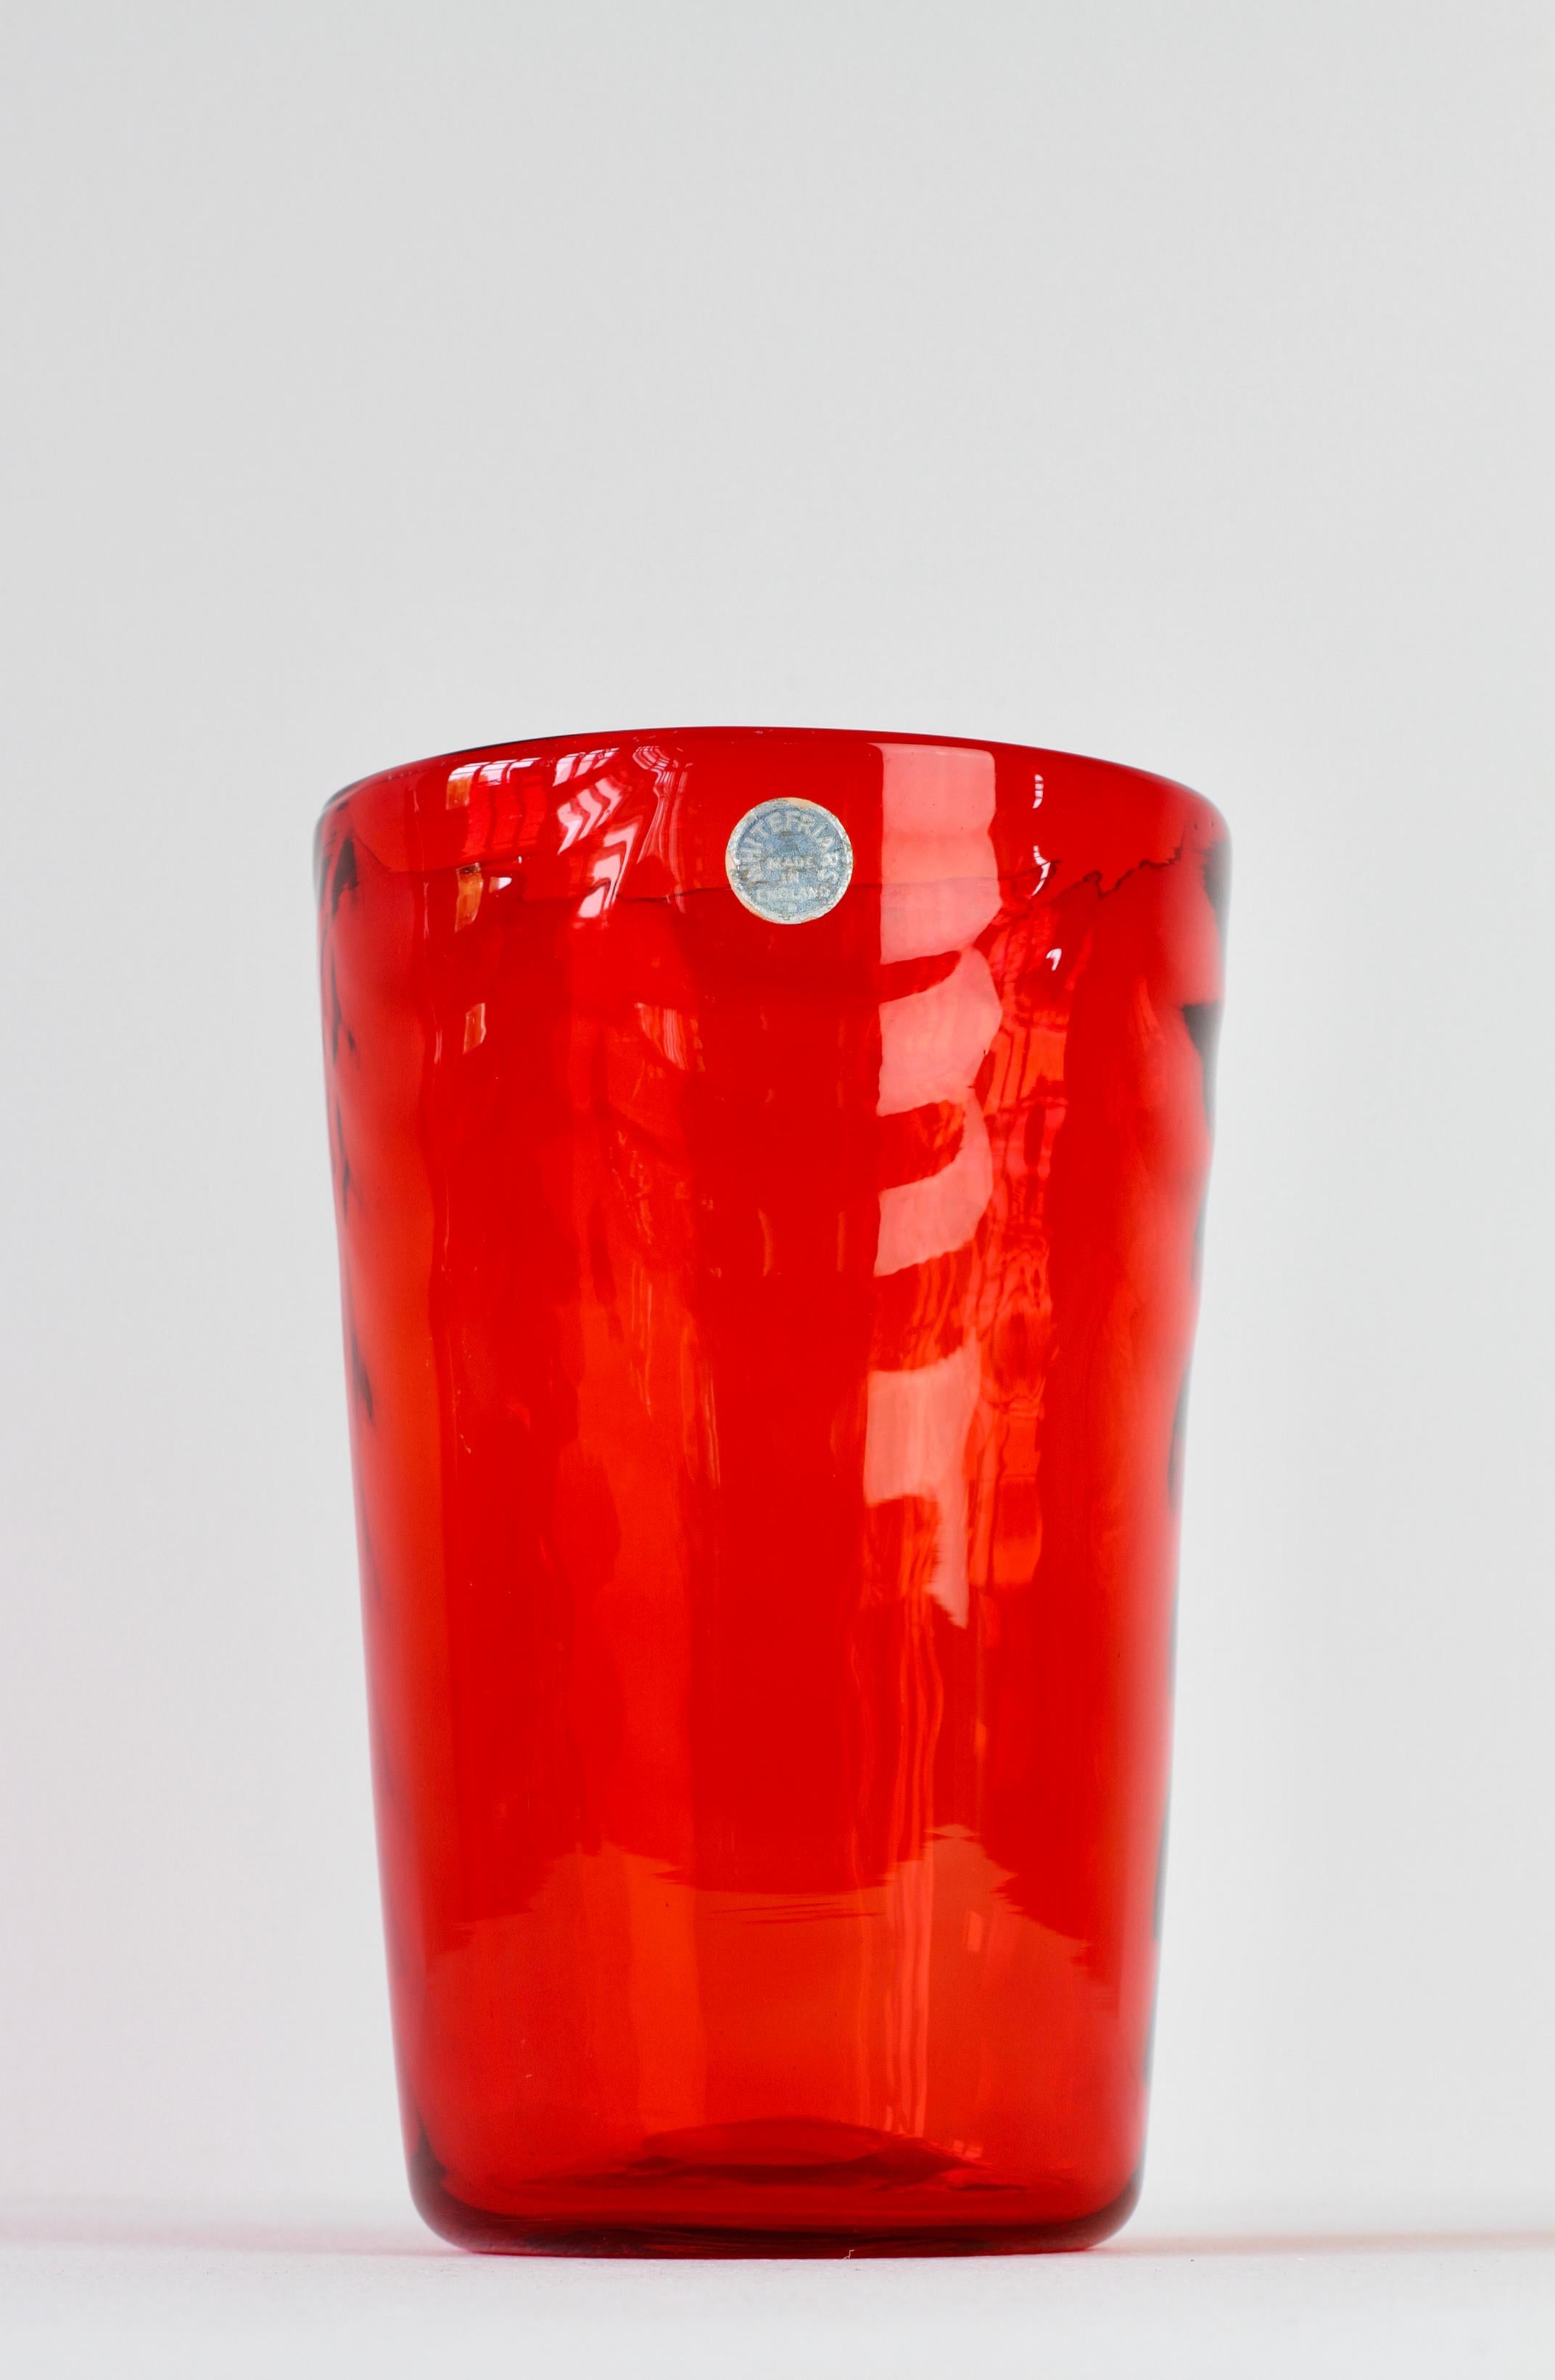 Wonderful Mid-Century Modern vase by Barnaby Marriott Powell for British / English glass manufacturer Whitefriars glass, circa 1938. This beautiful bright ruby red wave ribbed vase with a classic funnel form captured in vivid, vibrant red coloured /